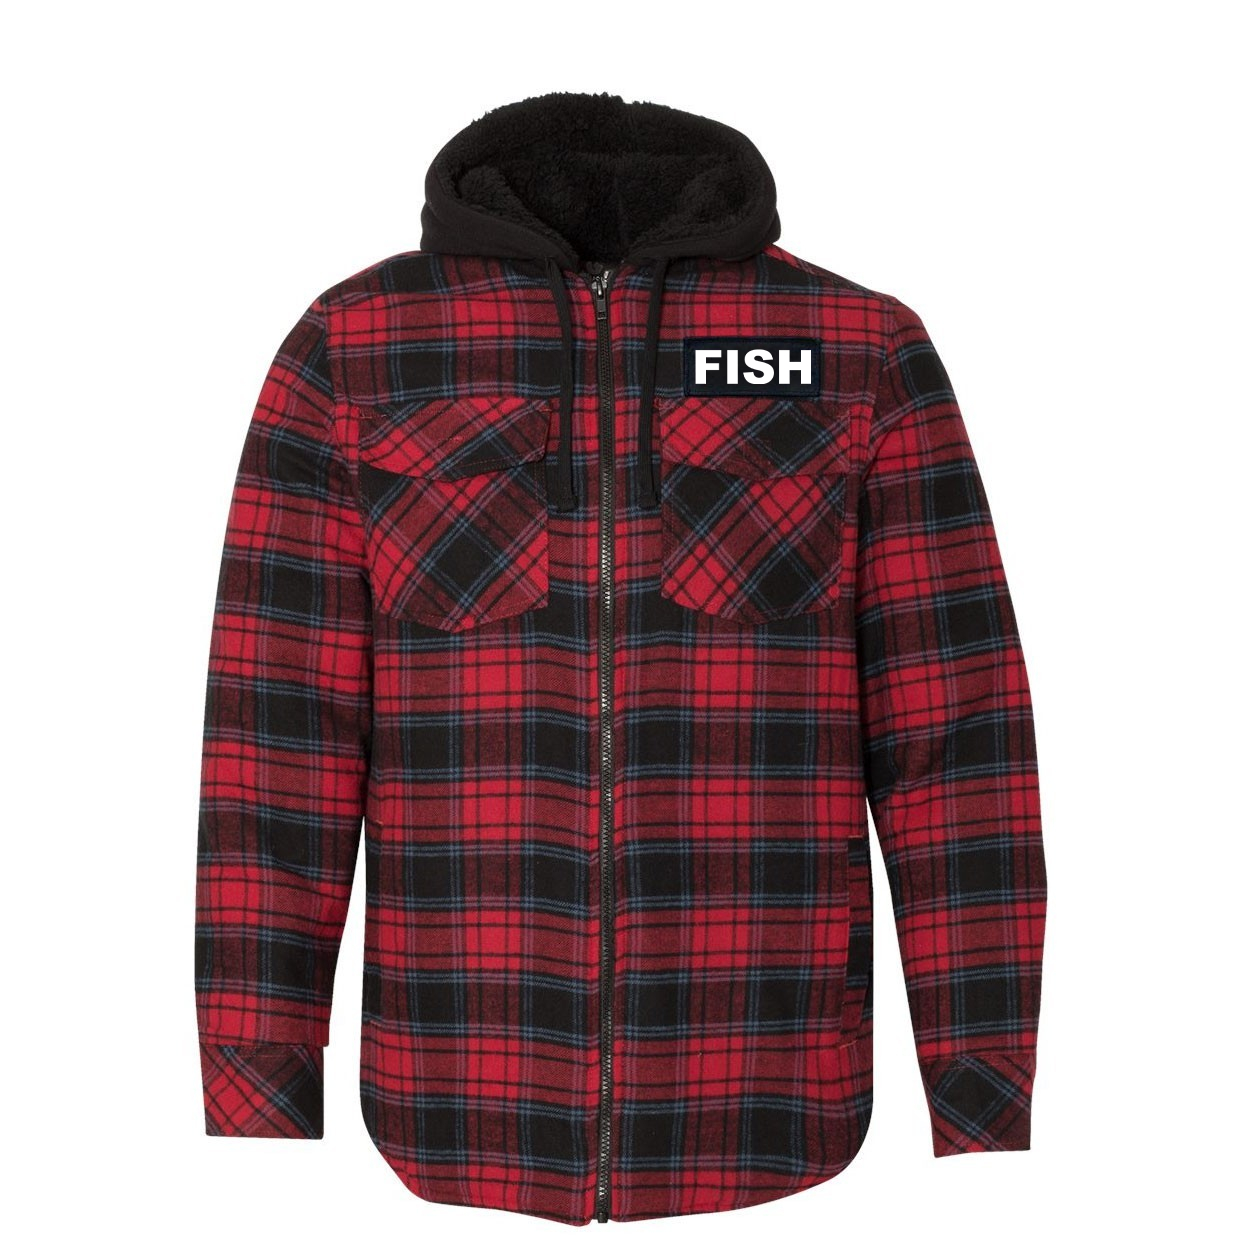 Fish Brand Logo Classic Unisex Full Zip Woven Patch Hooded Flannel Jacket Red/Black Buffalo (White Logo)